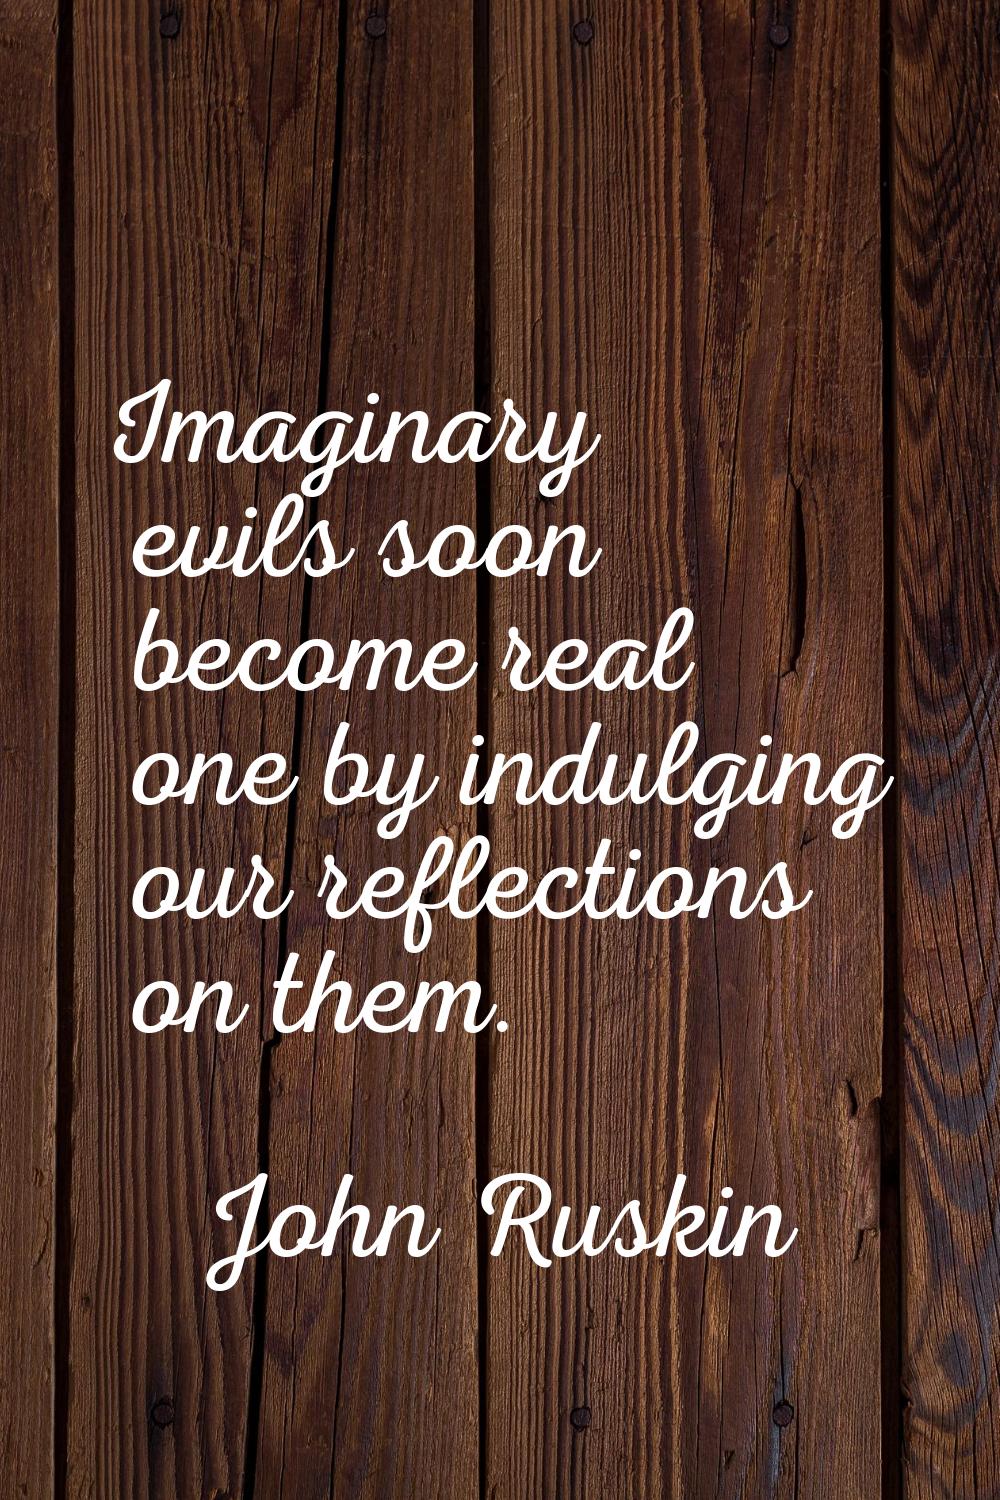 Imaginary evils soon become real one by indulging our reflections on them.